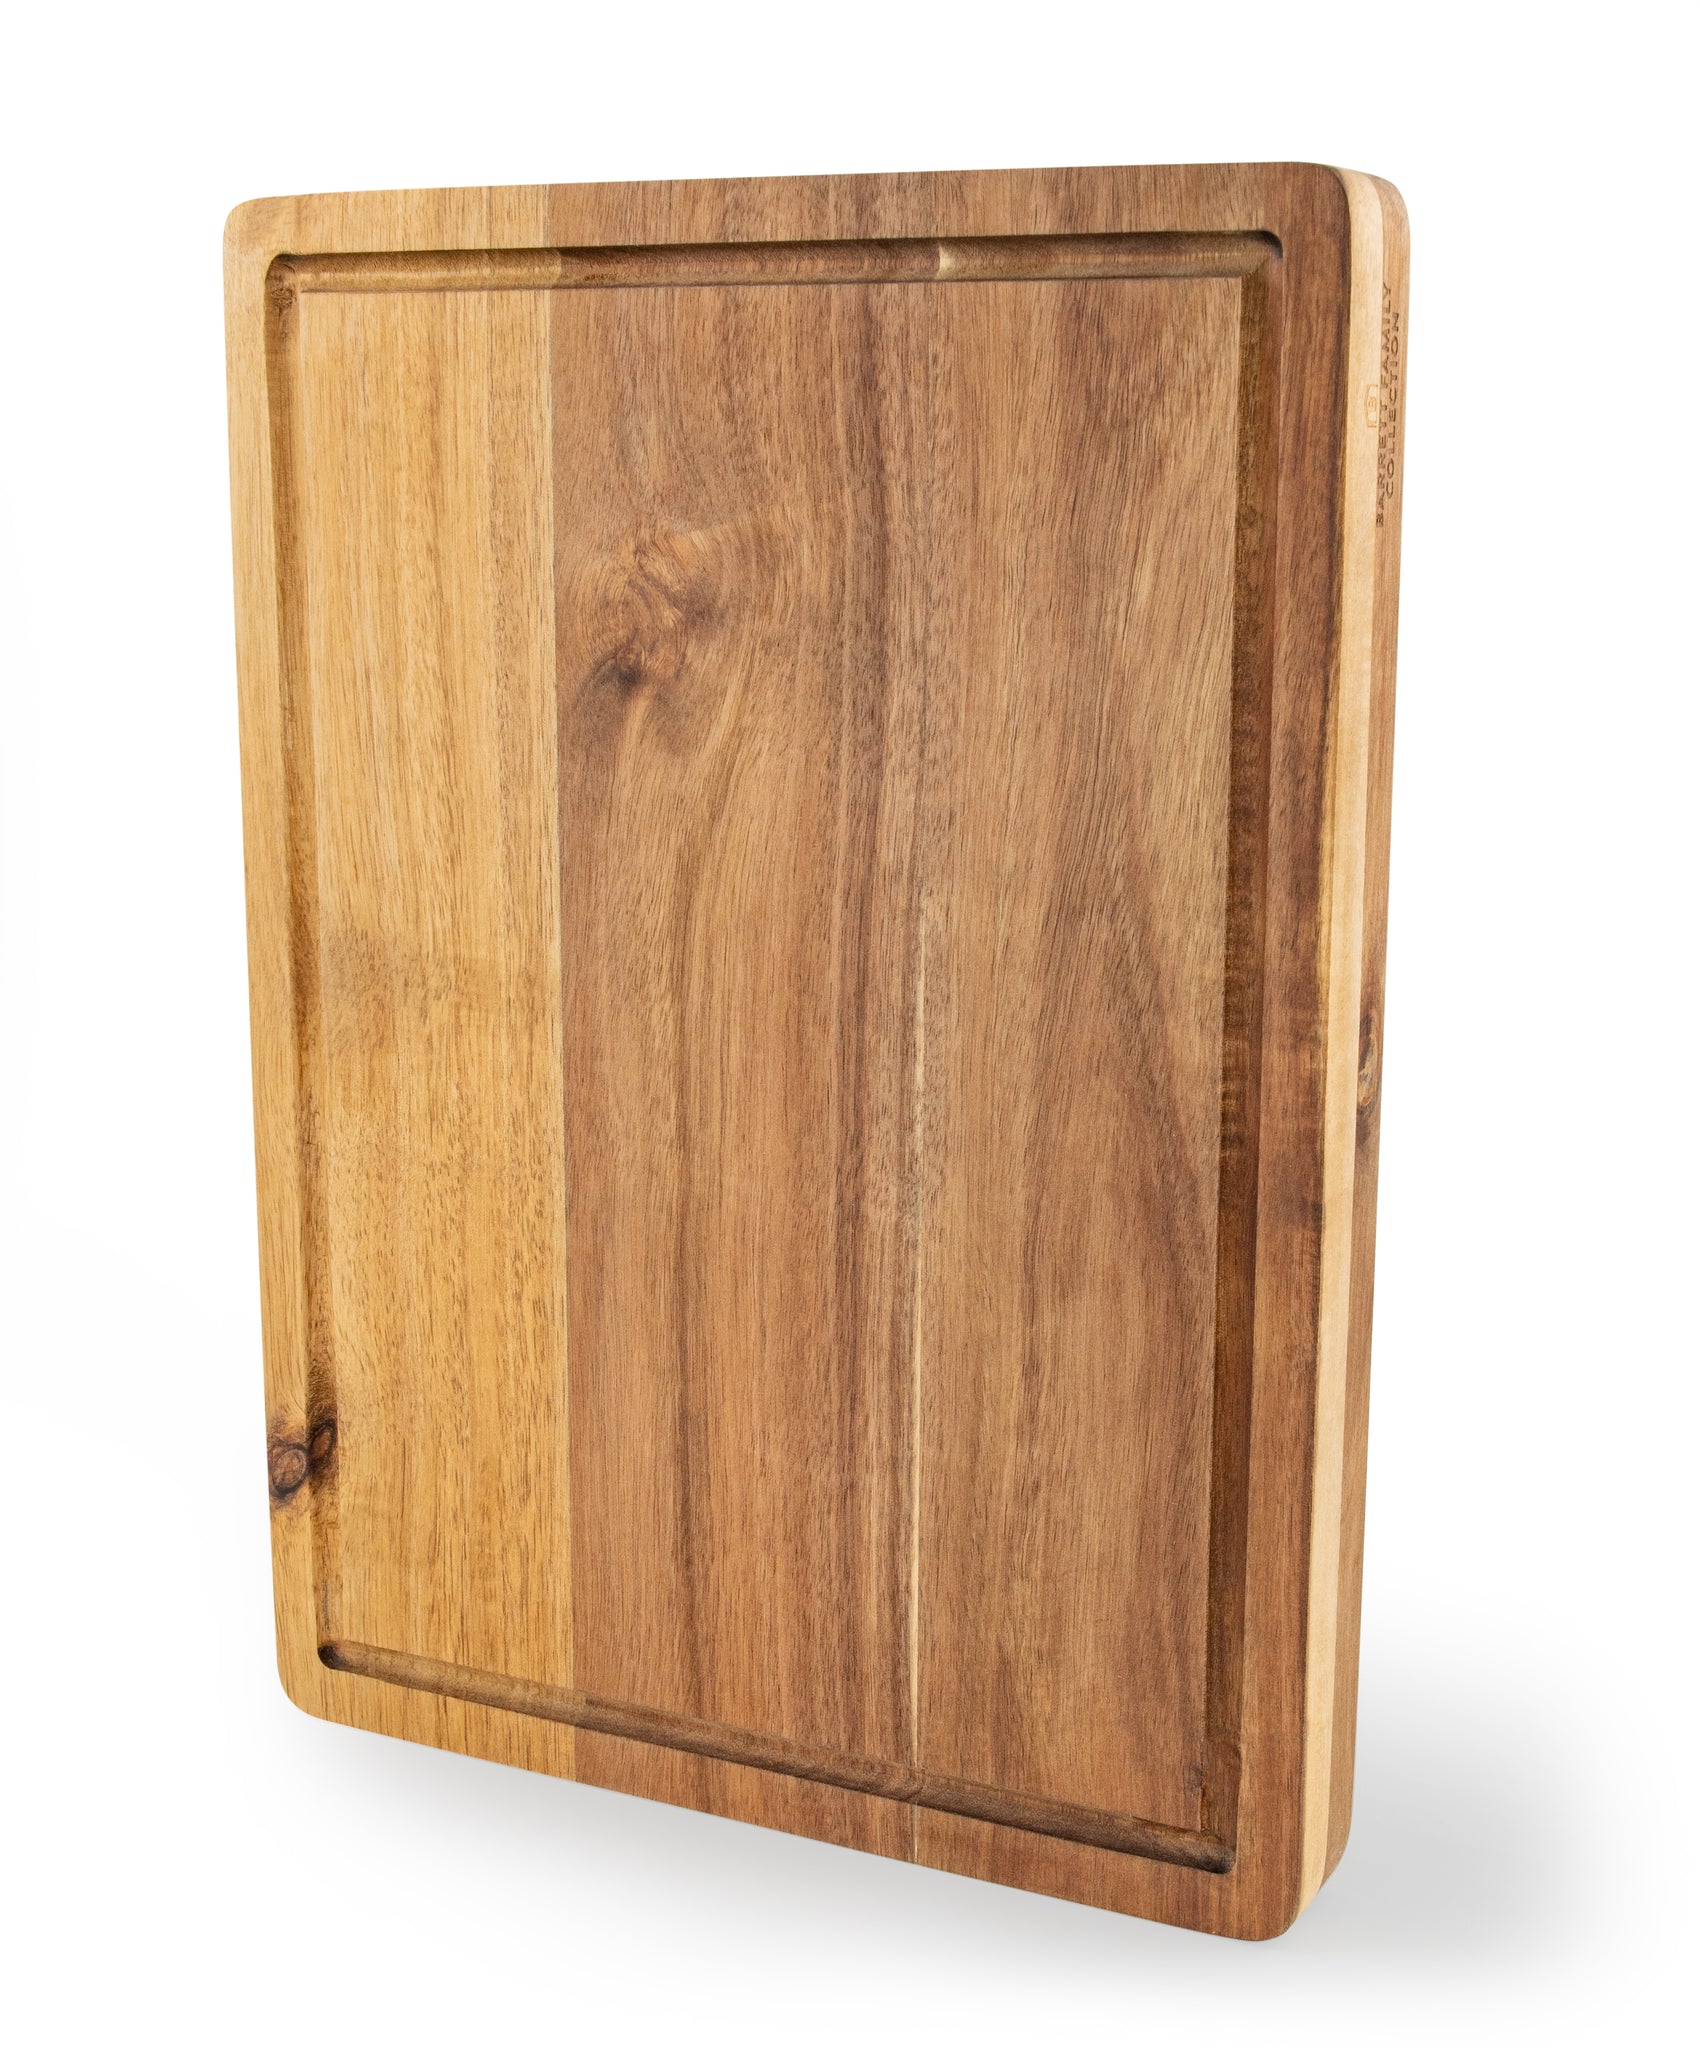 Extra Large Acacia Wood Cutting Board w/Juice Grooves and Handles